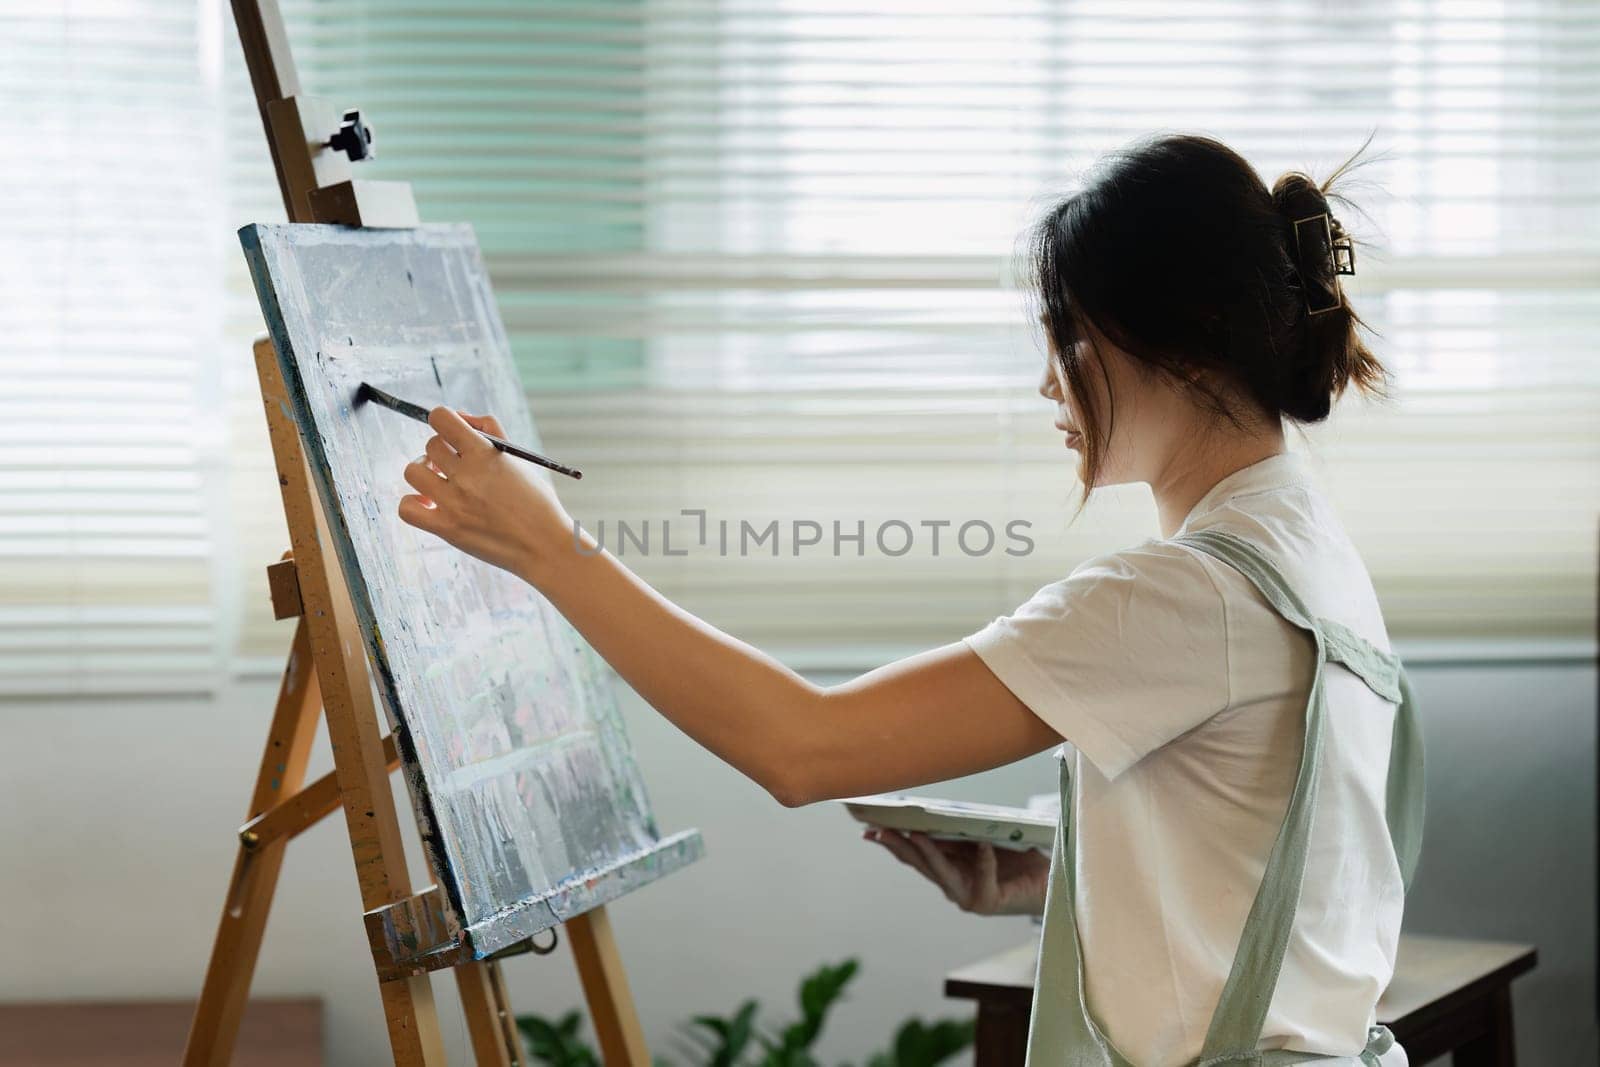 beautiful young woman artist working on painting something on a large canvas by itchaznong